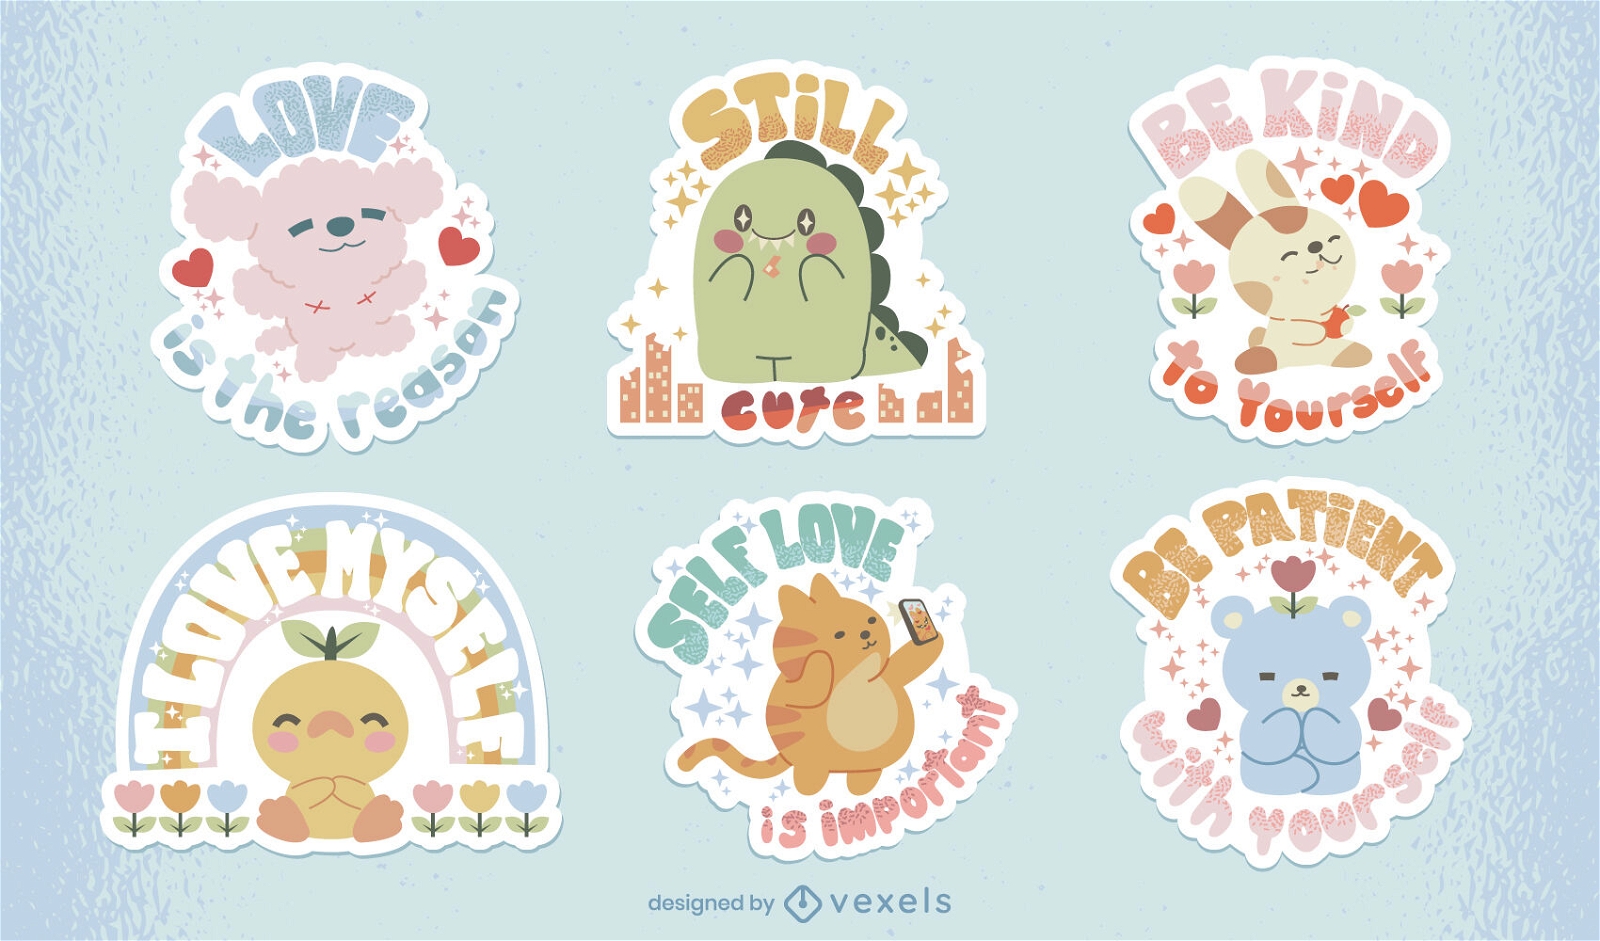 Self love characters stickers set